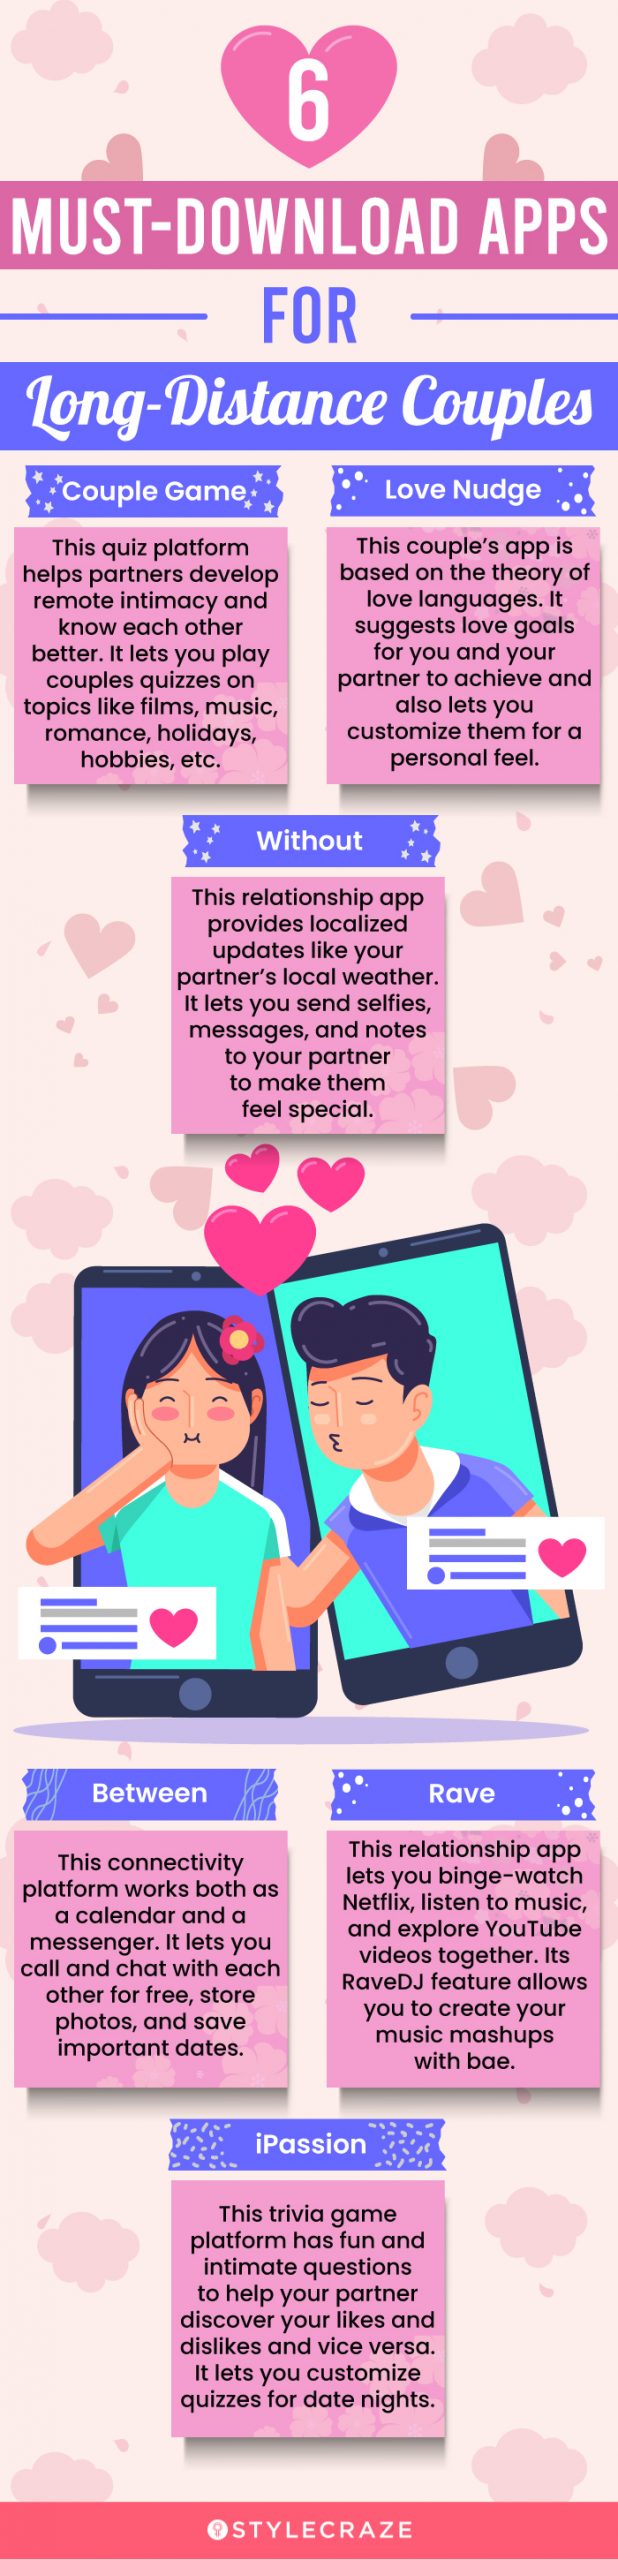 6 must download apps for long distance couples (infographic)